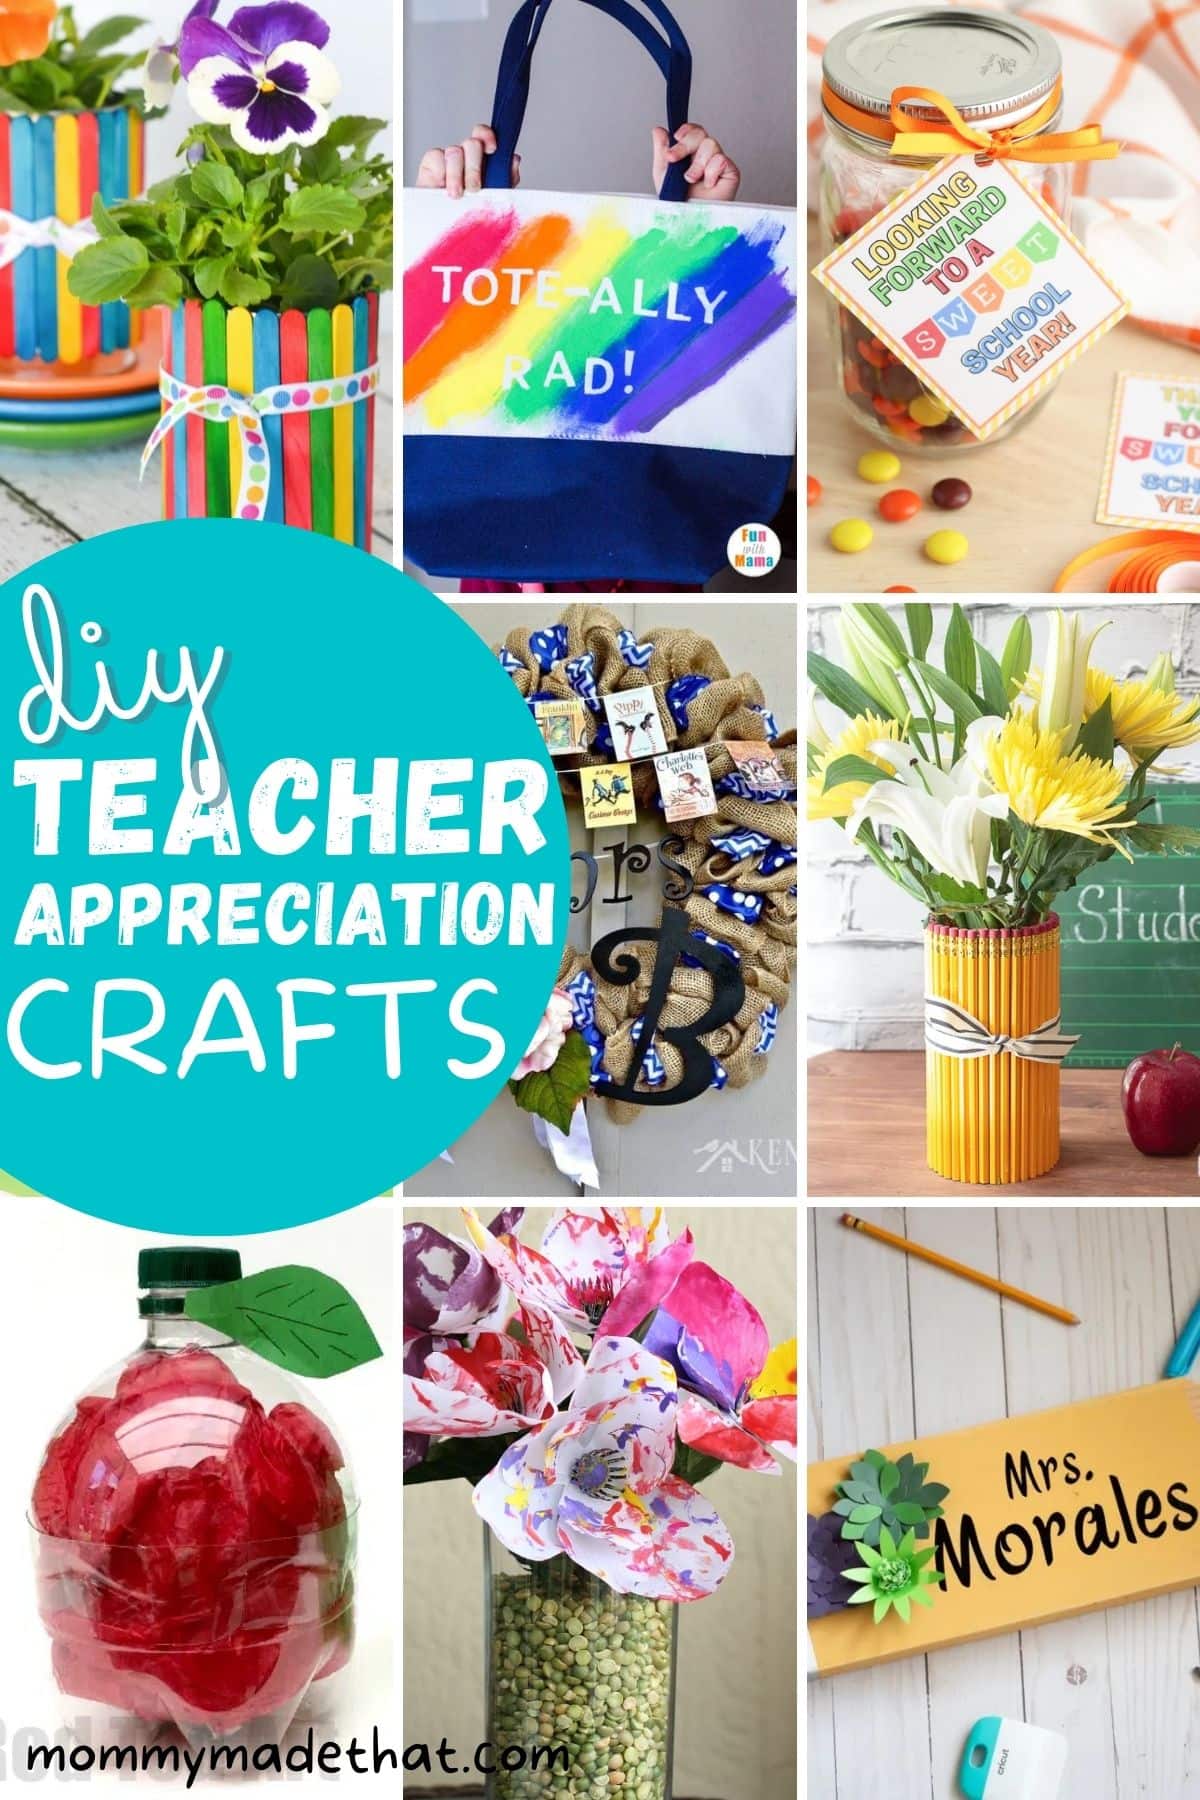 The Best Teacher Appreciation Crafts that Make Awesome Gifts